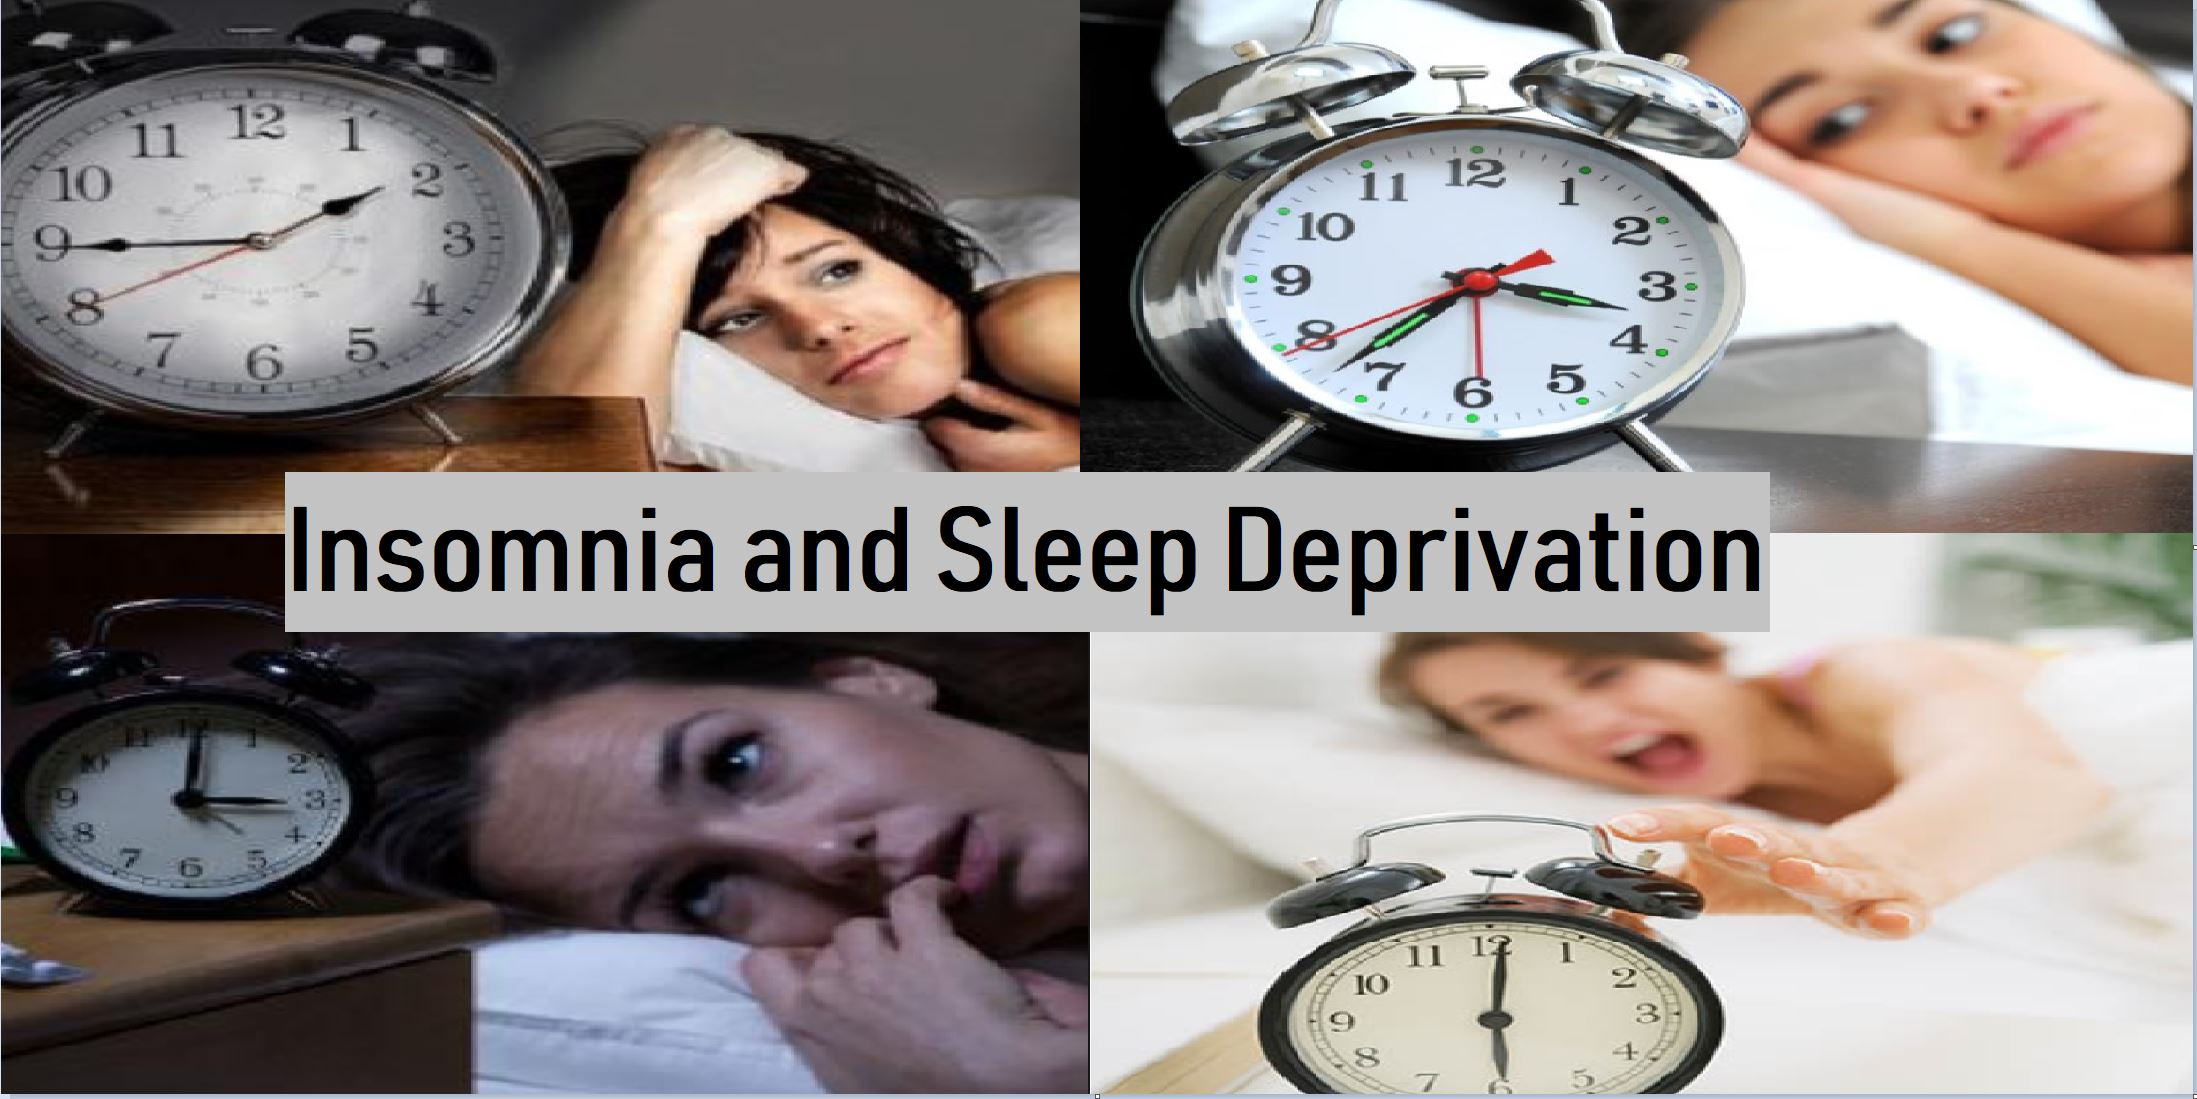 Insomnia and sleep deprivation